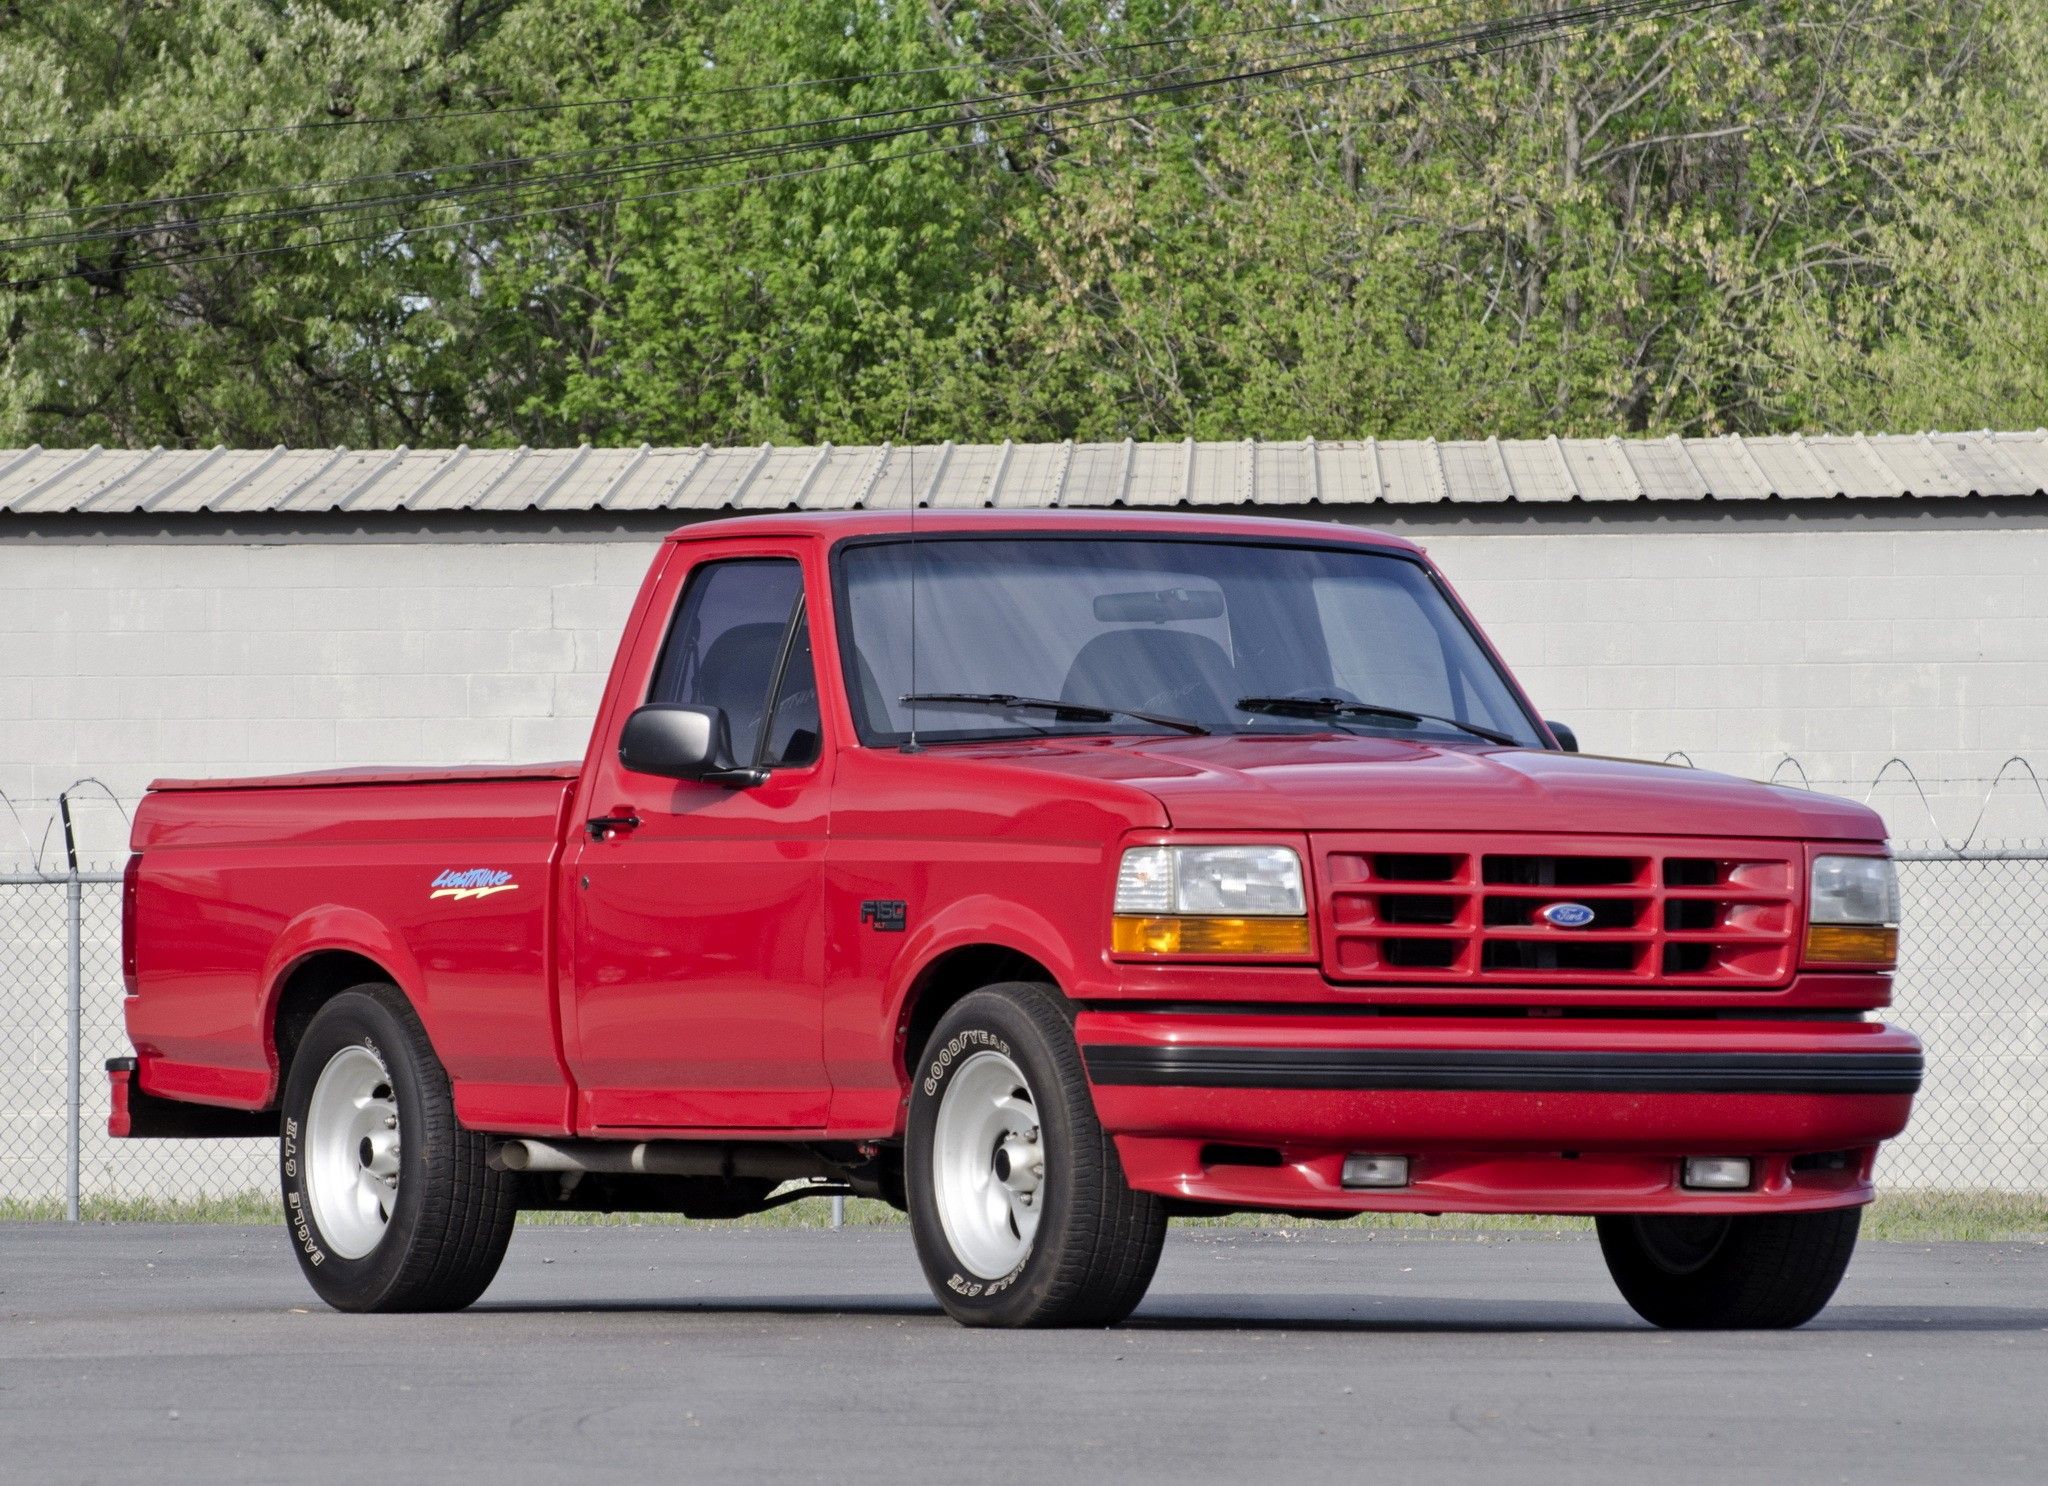 1993 Red Ford-150 Lightning Front View